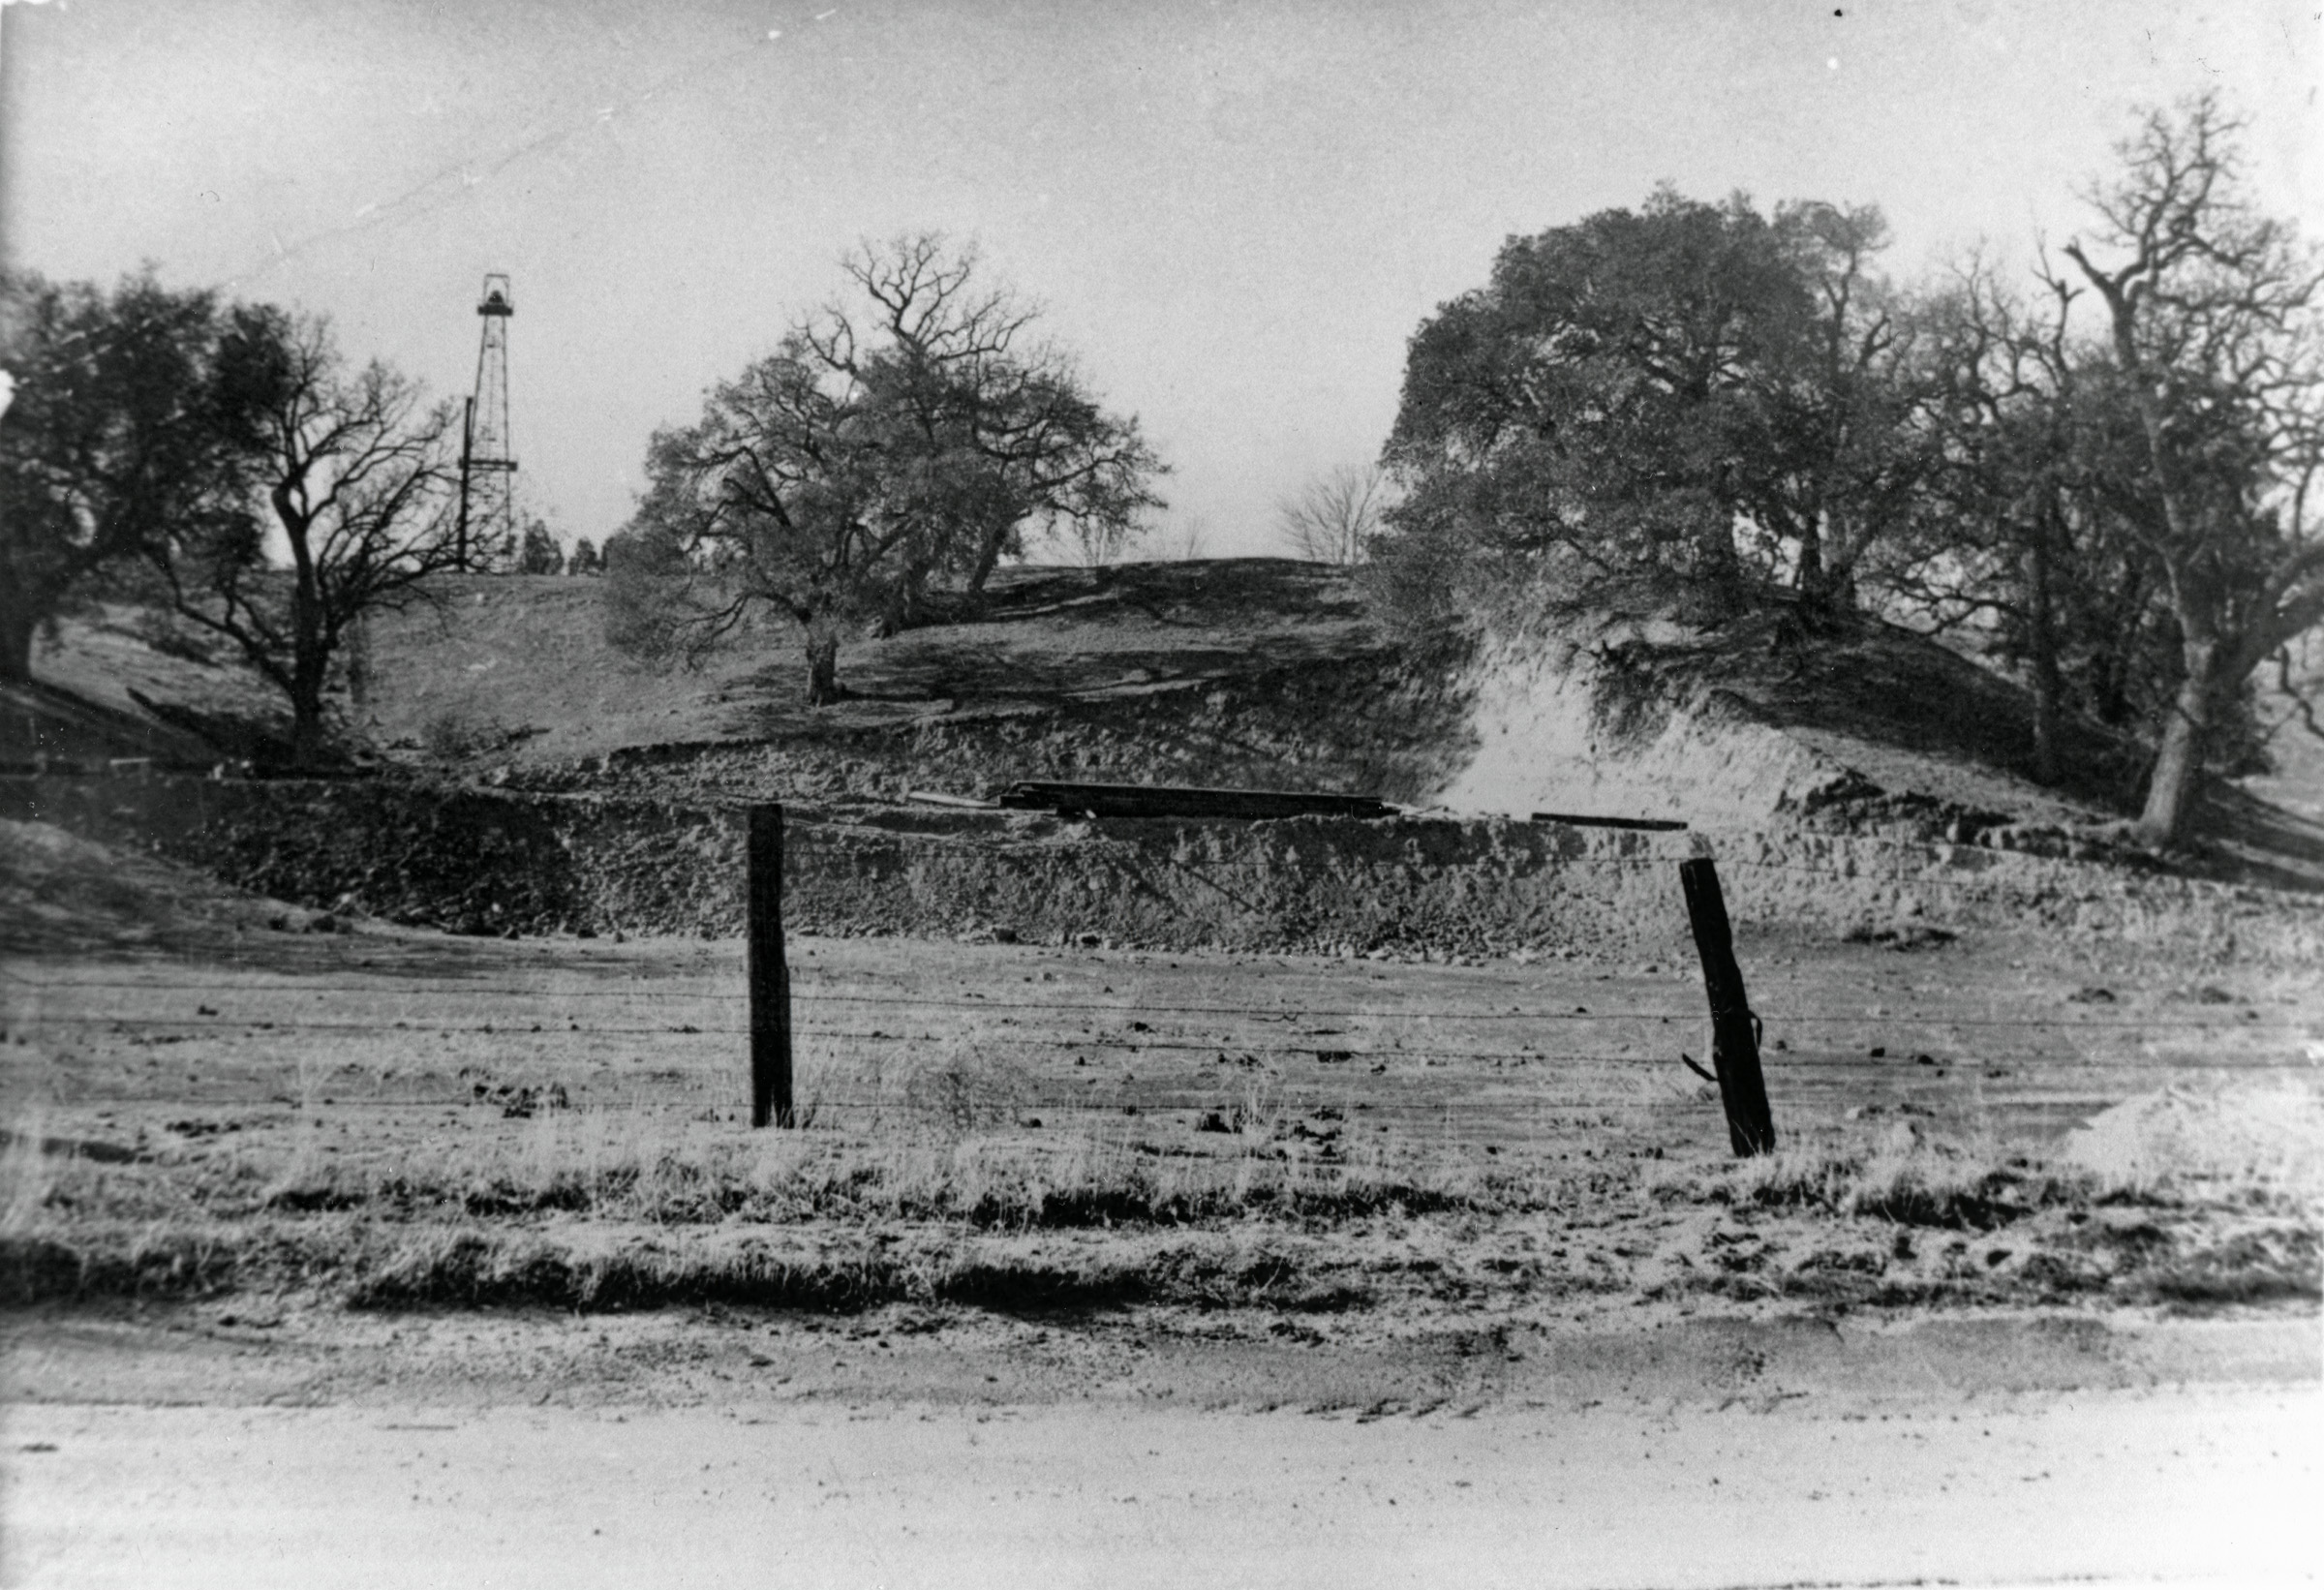 Arcadia Street during the short-lived oil boom of 1948-1949